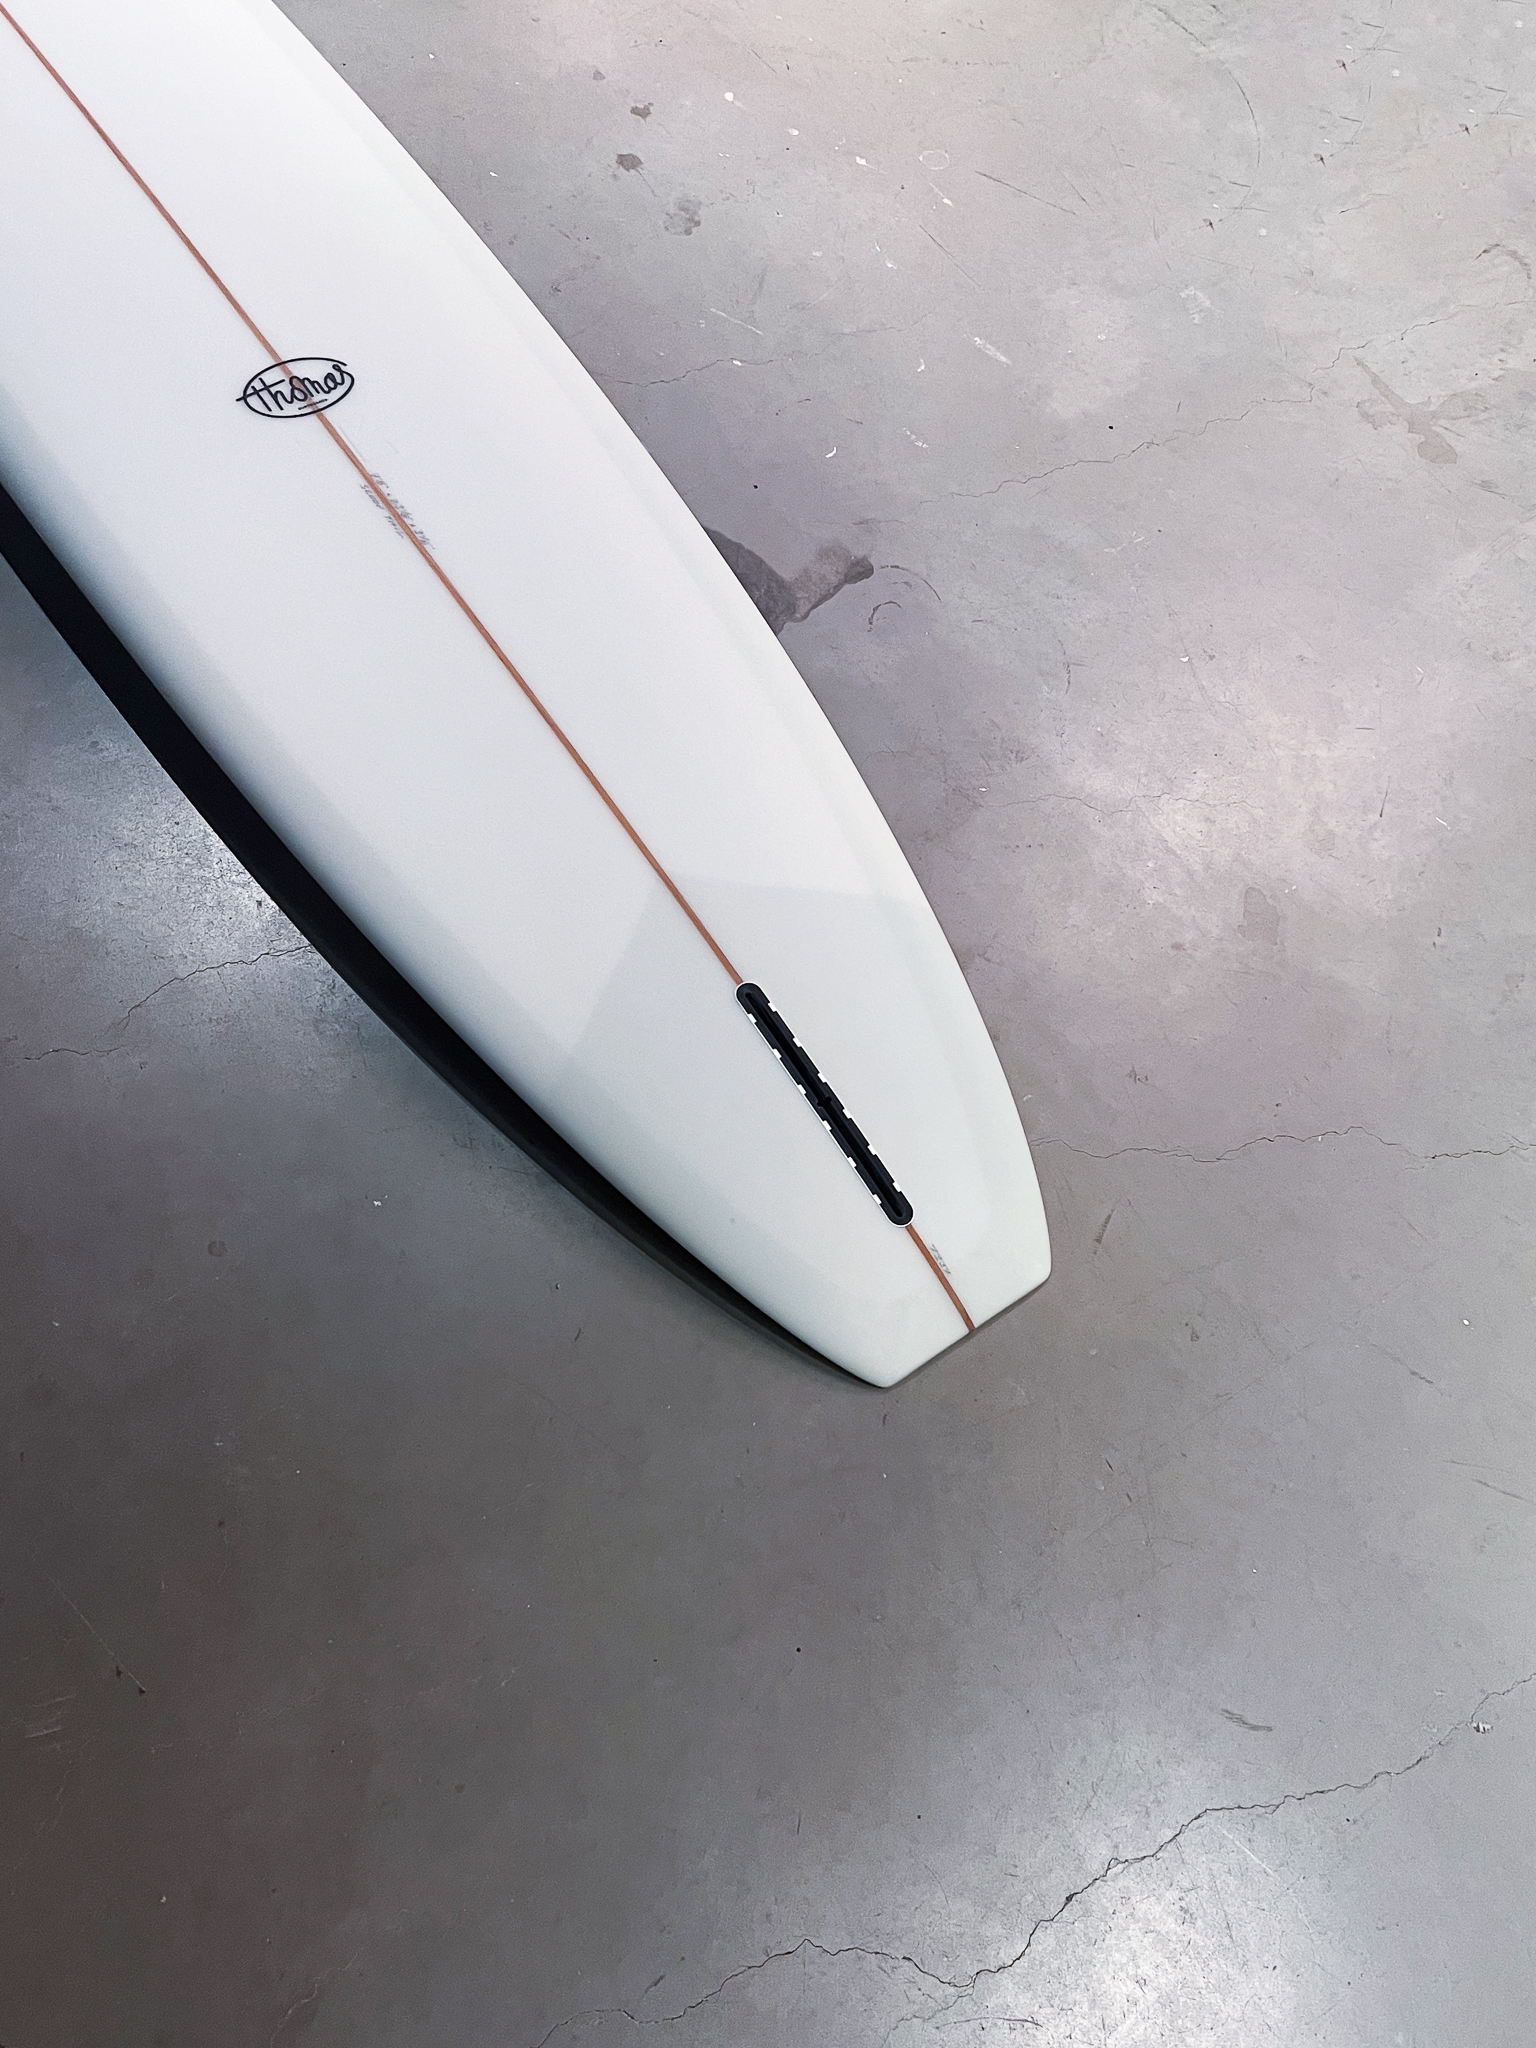 9’8” Scoop Tail #7337